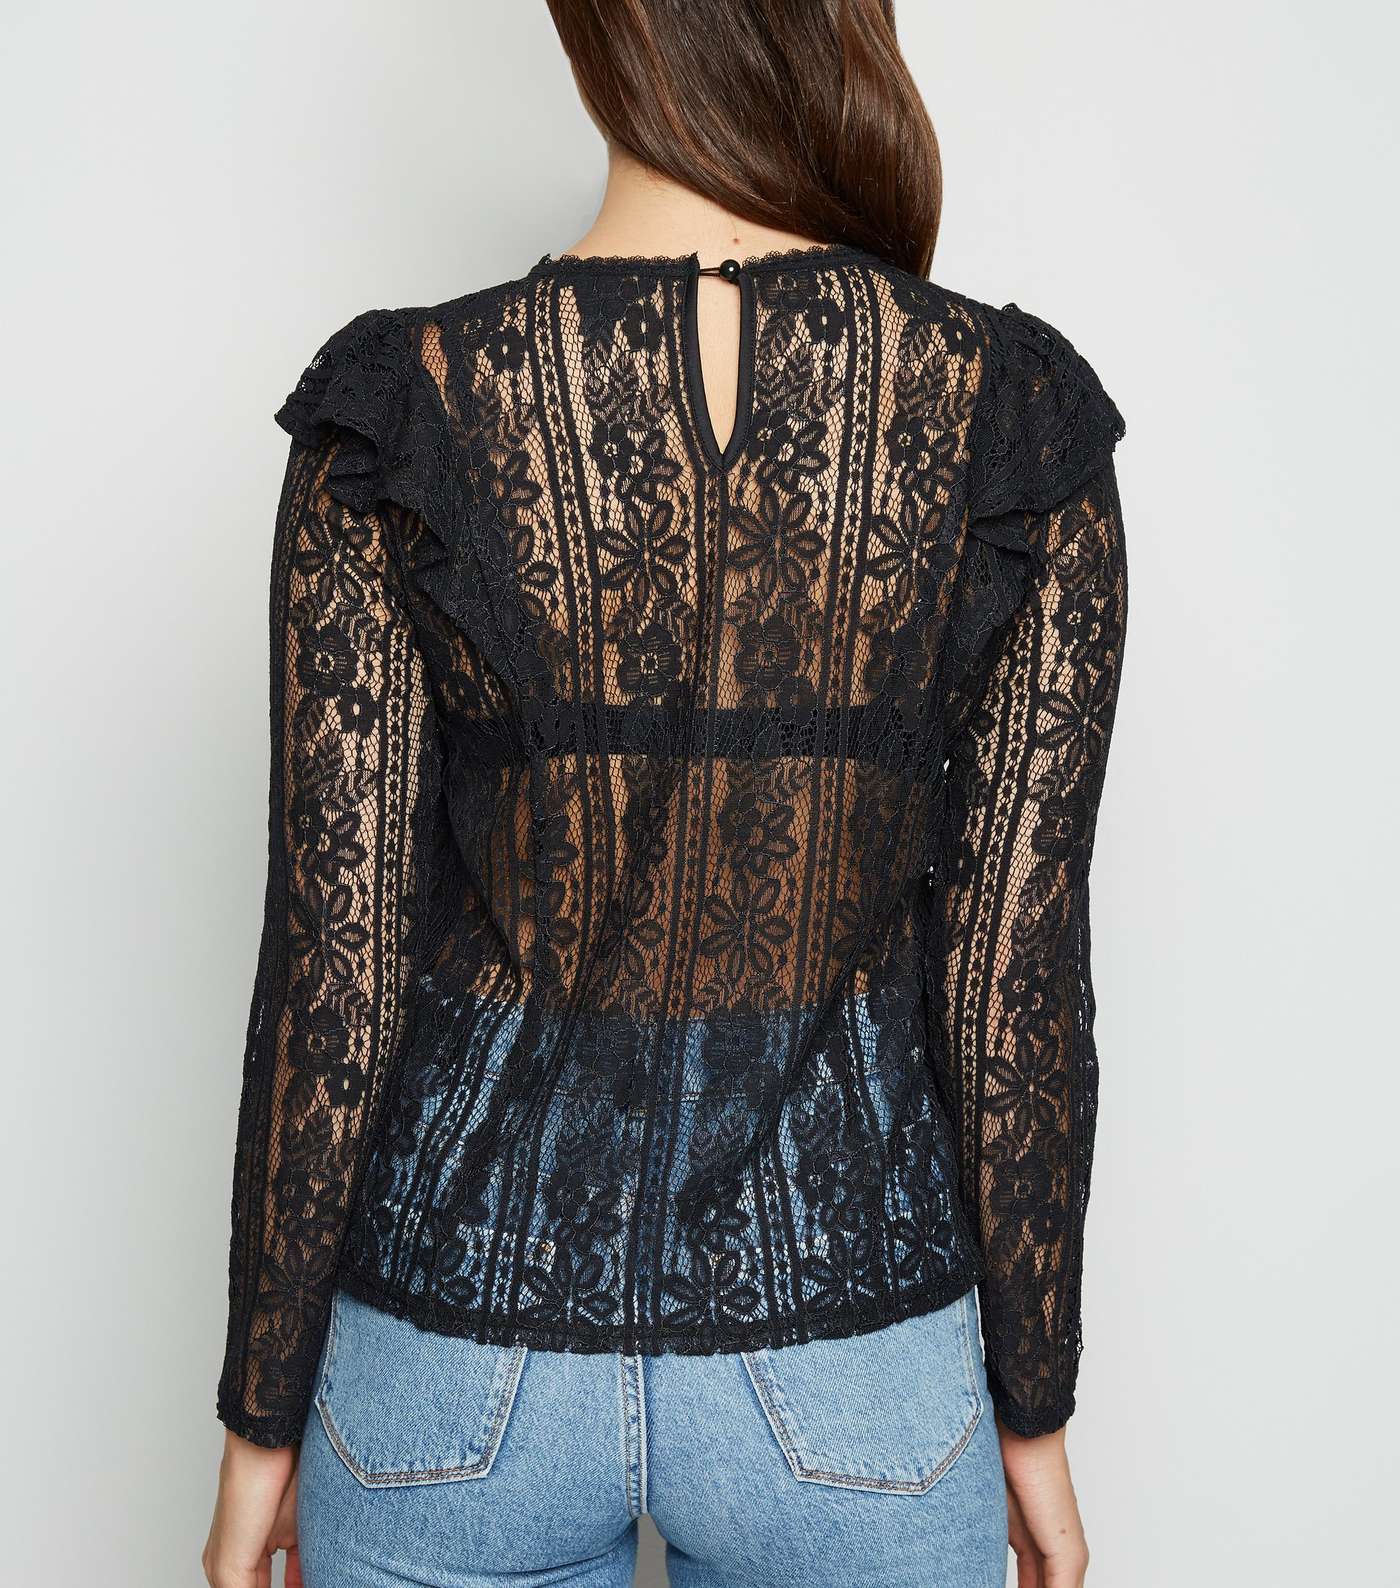 Black Lace Long Sleeve Frill Trim Top Image 3